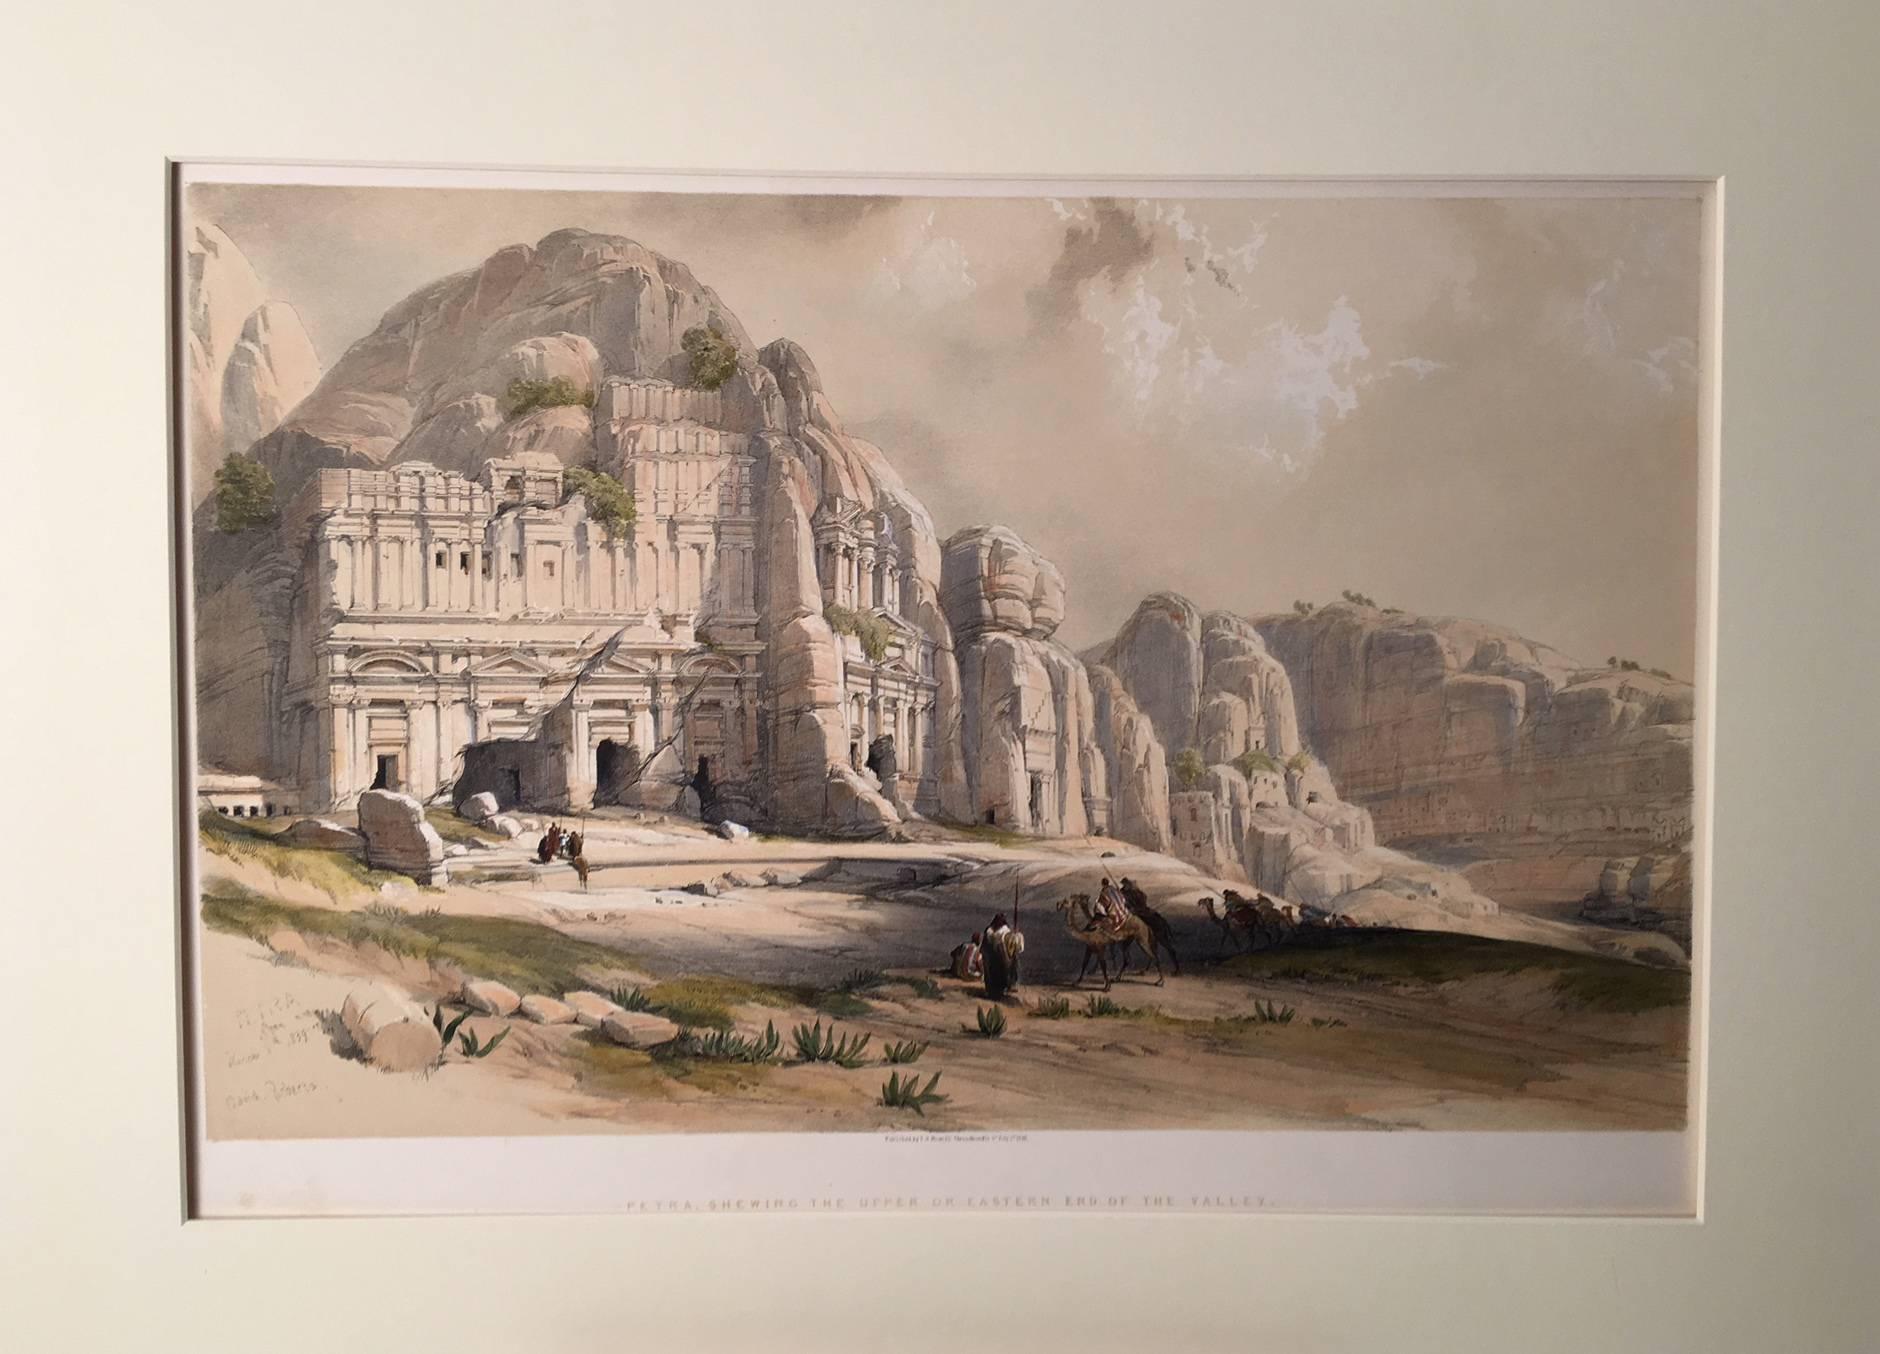 Petra Shewing the Upper or Eastern End of the Valley. - Print by David Roberts